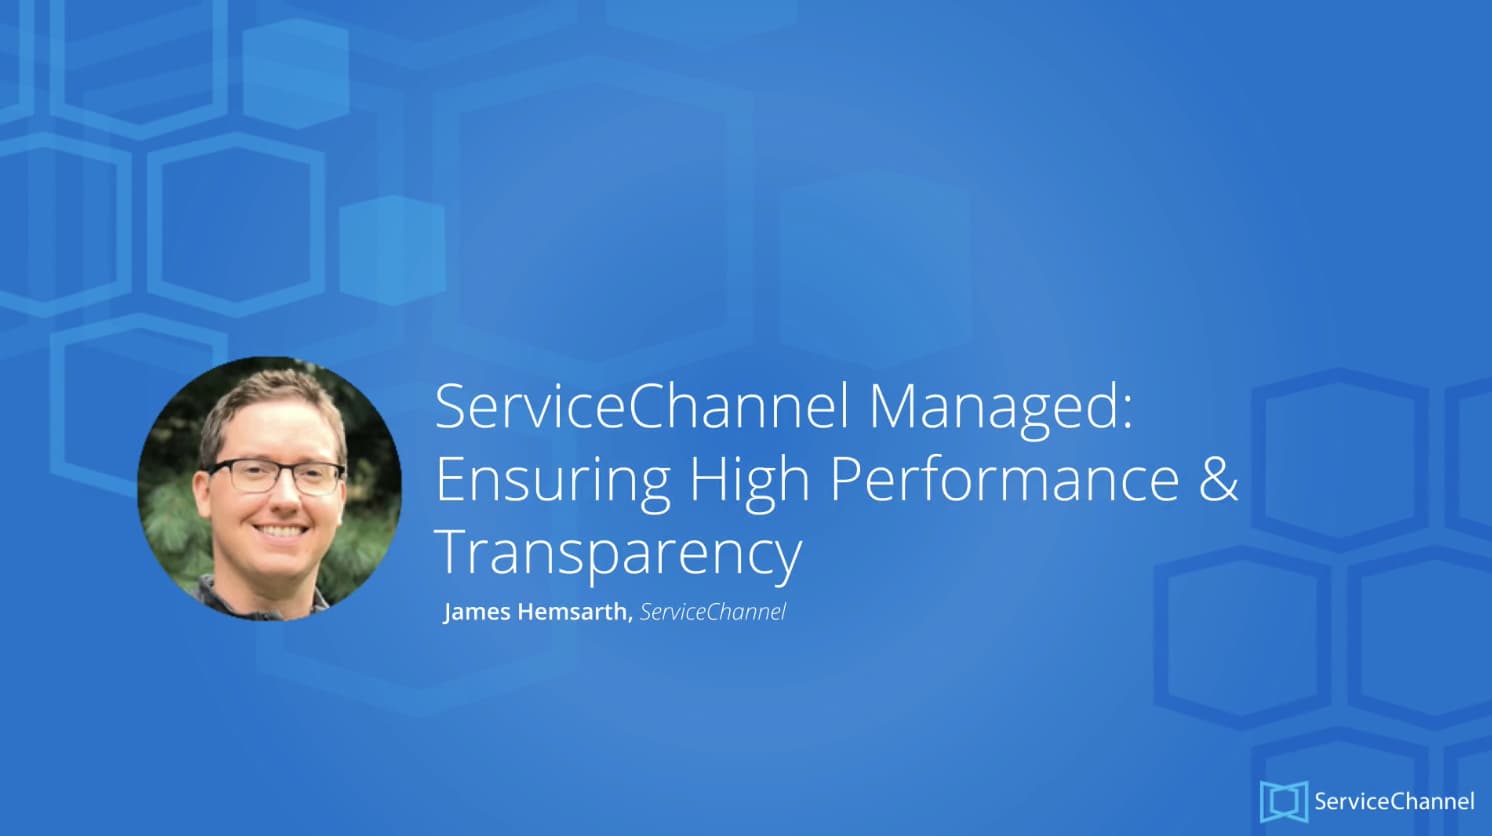 ServiceChannel Managed: Ensuring High Performance & Transparency